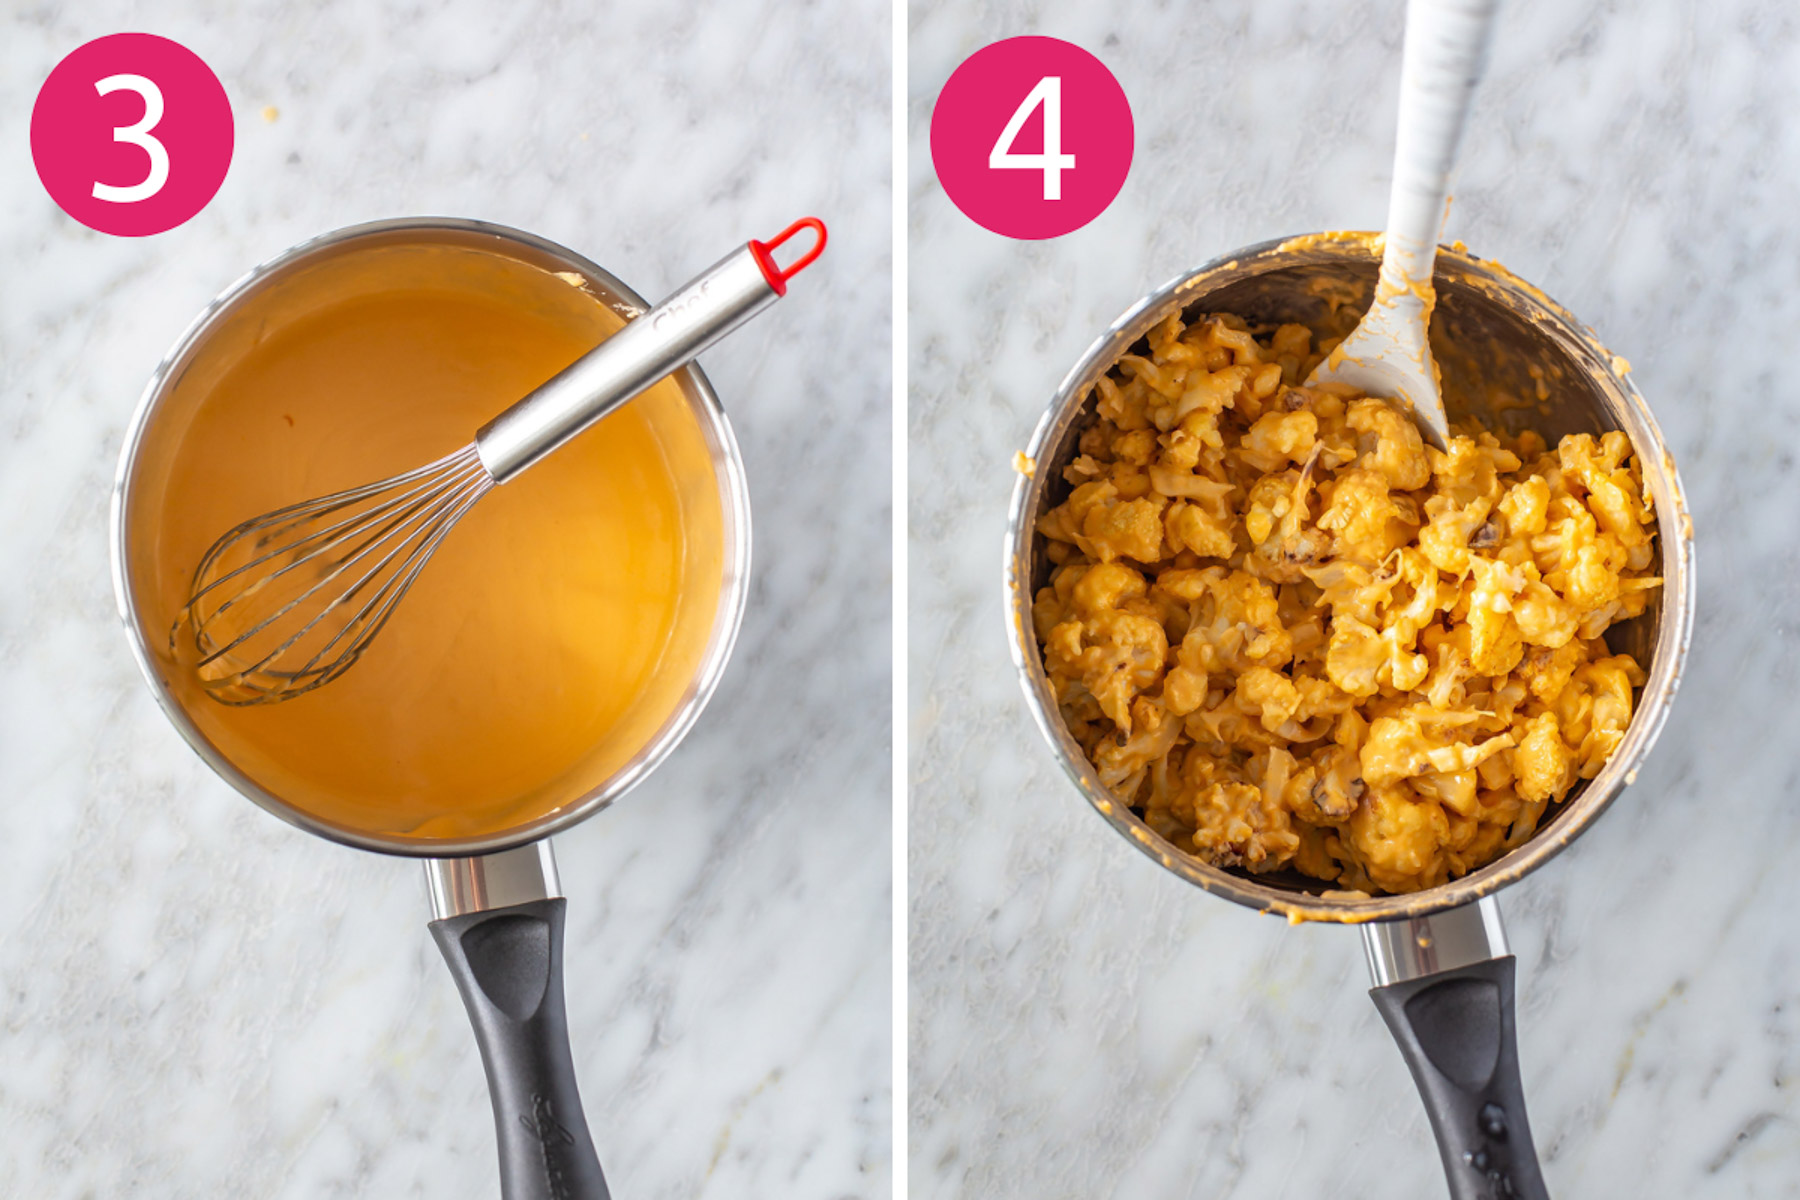 Steps 3 and 4 for making cauliflower mac and cheese: Simmer cheese sauce then toss cauliflower in with sauce.